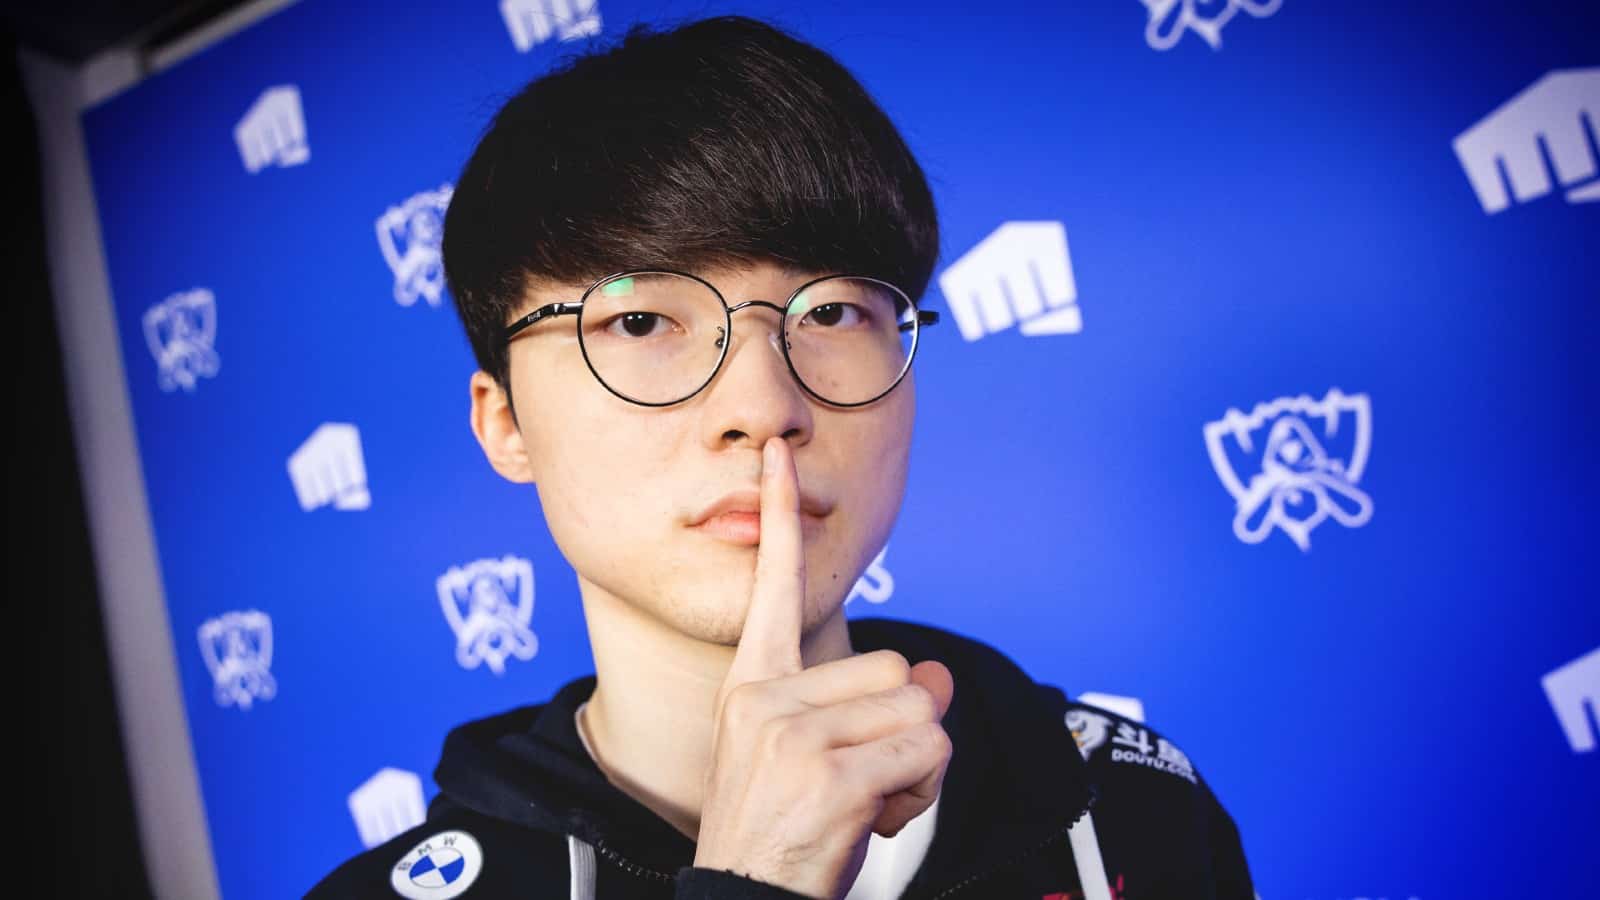 Faker poses at Worlds 2021